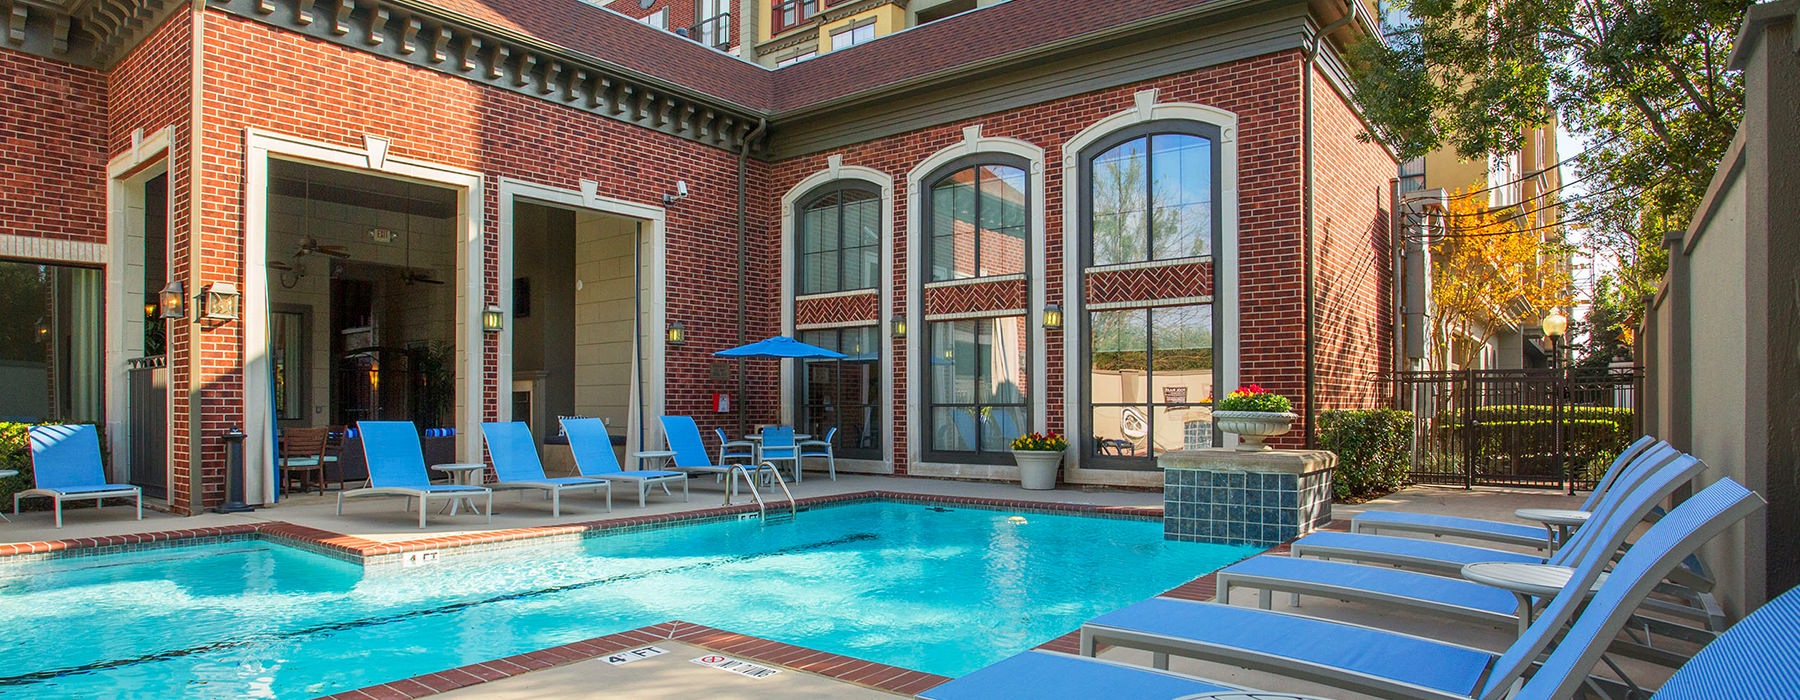 Sparkling pools with wi-fi access poolside